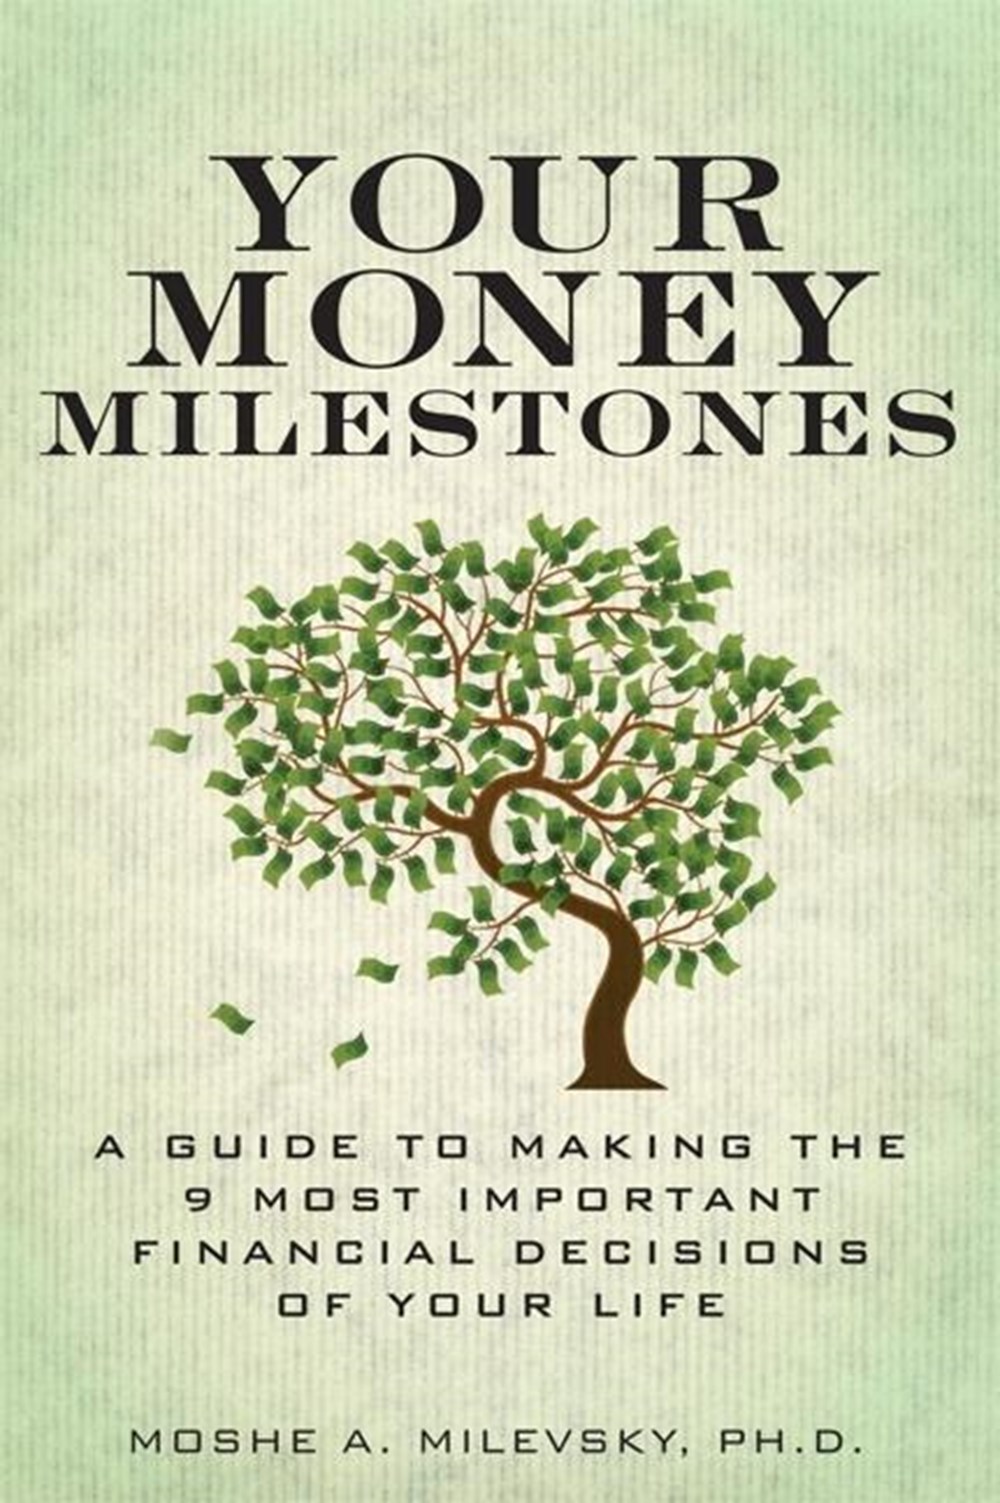 Your Money Milestones A Guide to Making the 9 Most Important Financial Decisions of Your Life